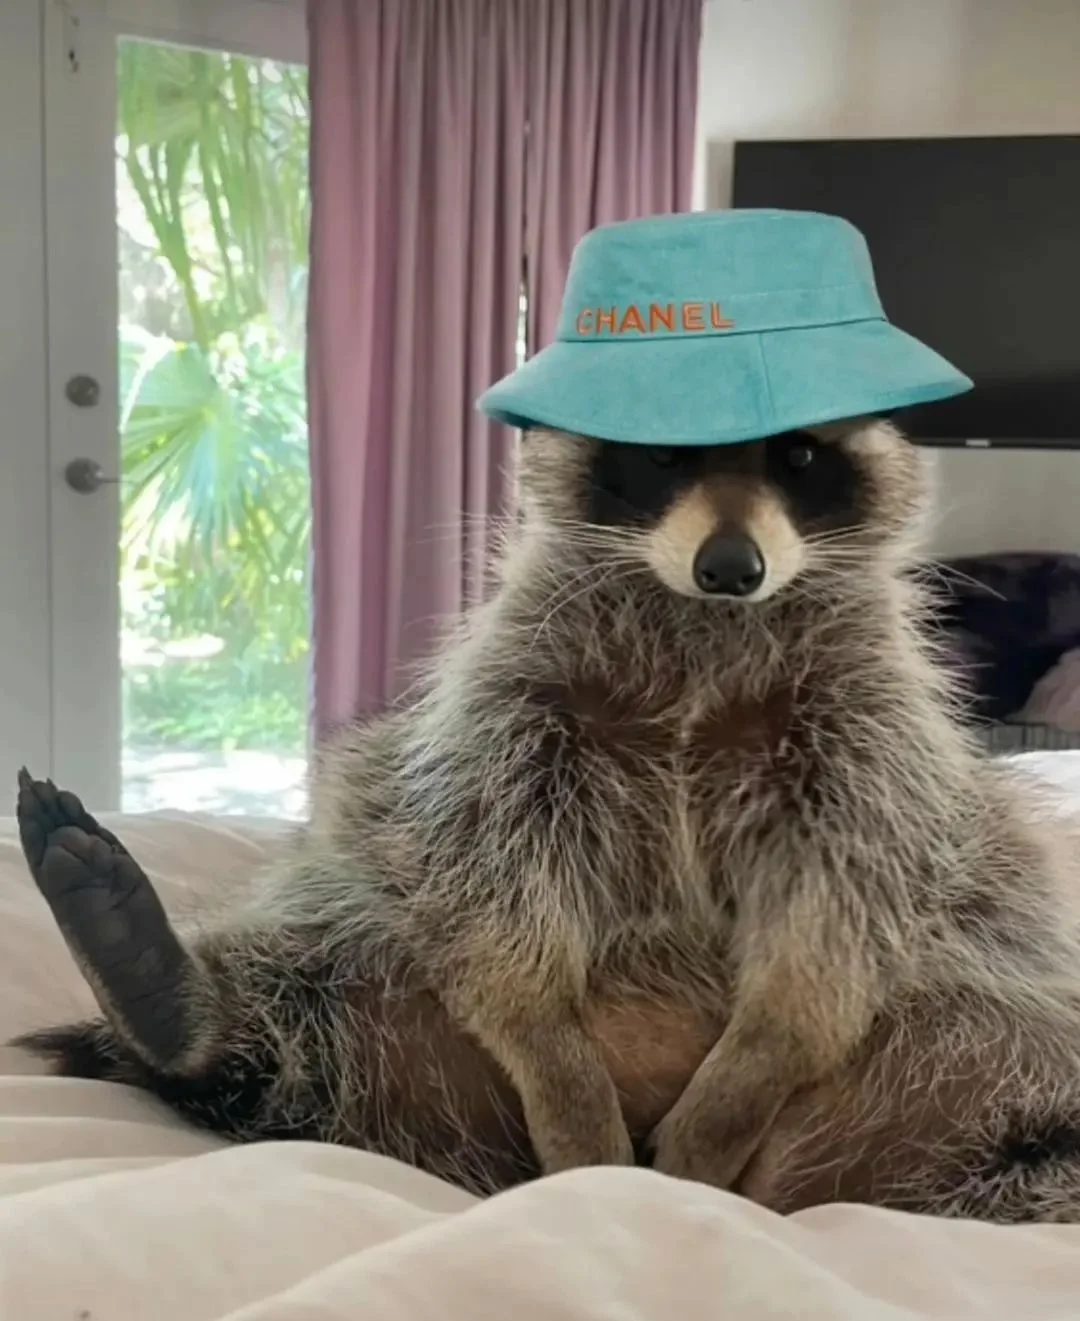 Raccoon posing with a hat.